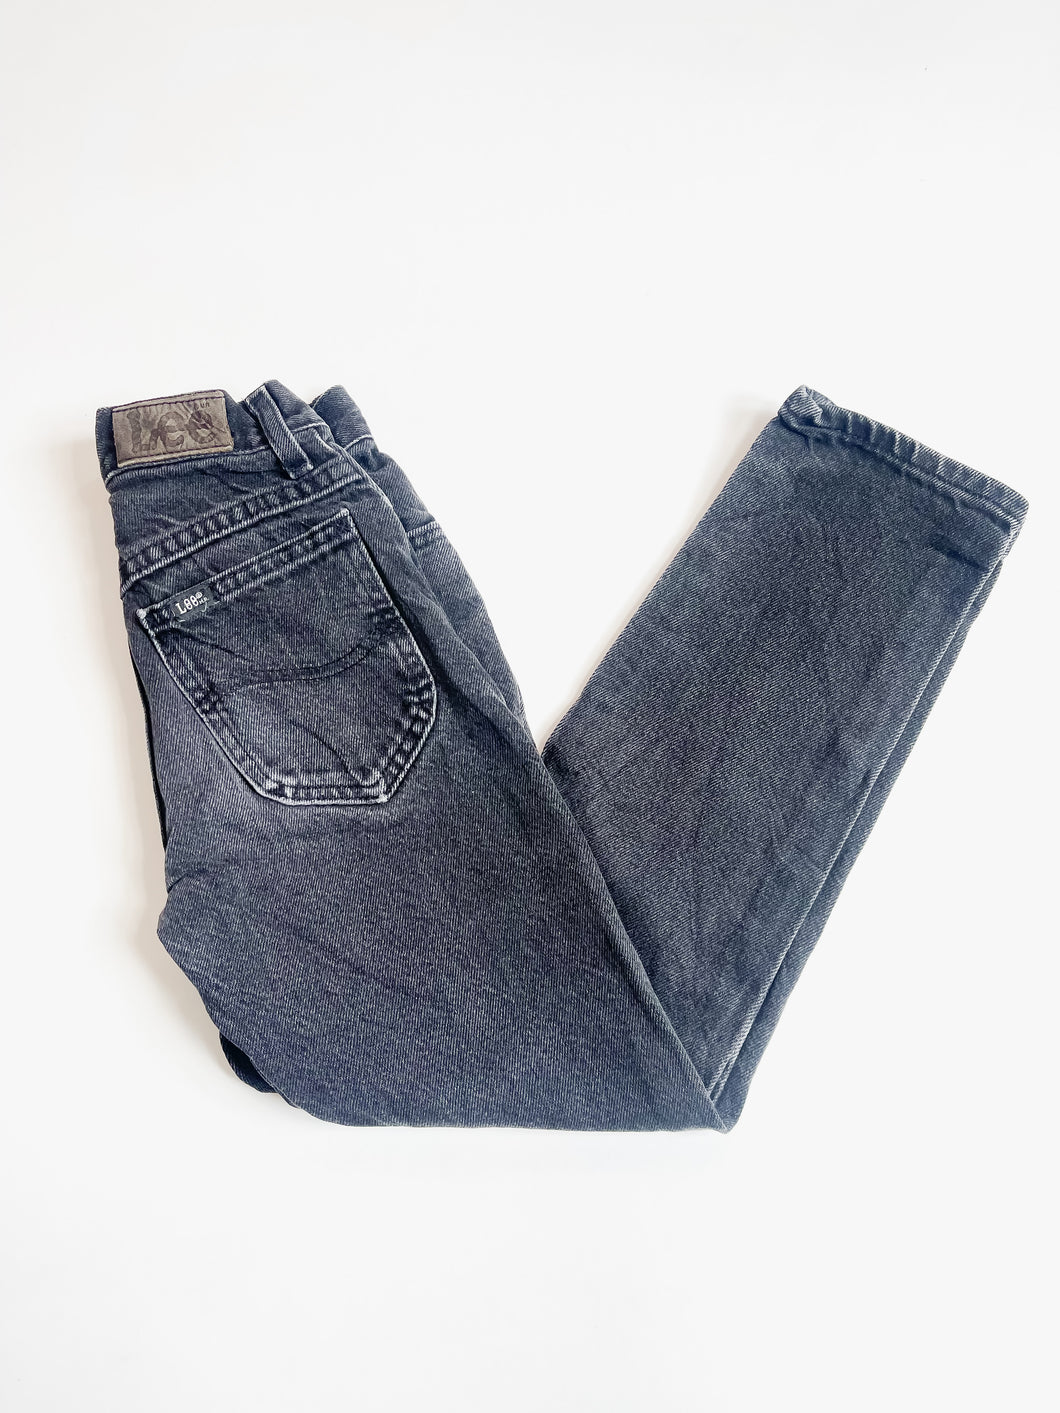 Vintage Lee union USA made jeans 80's - 90's (8y)